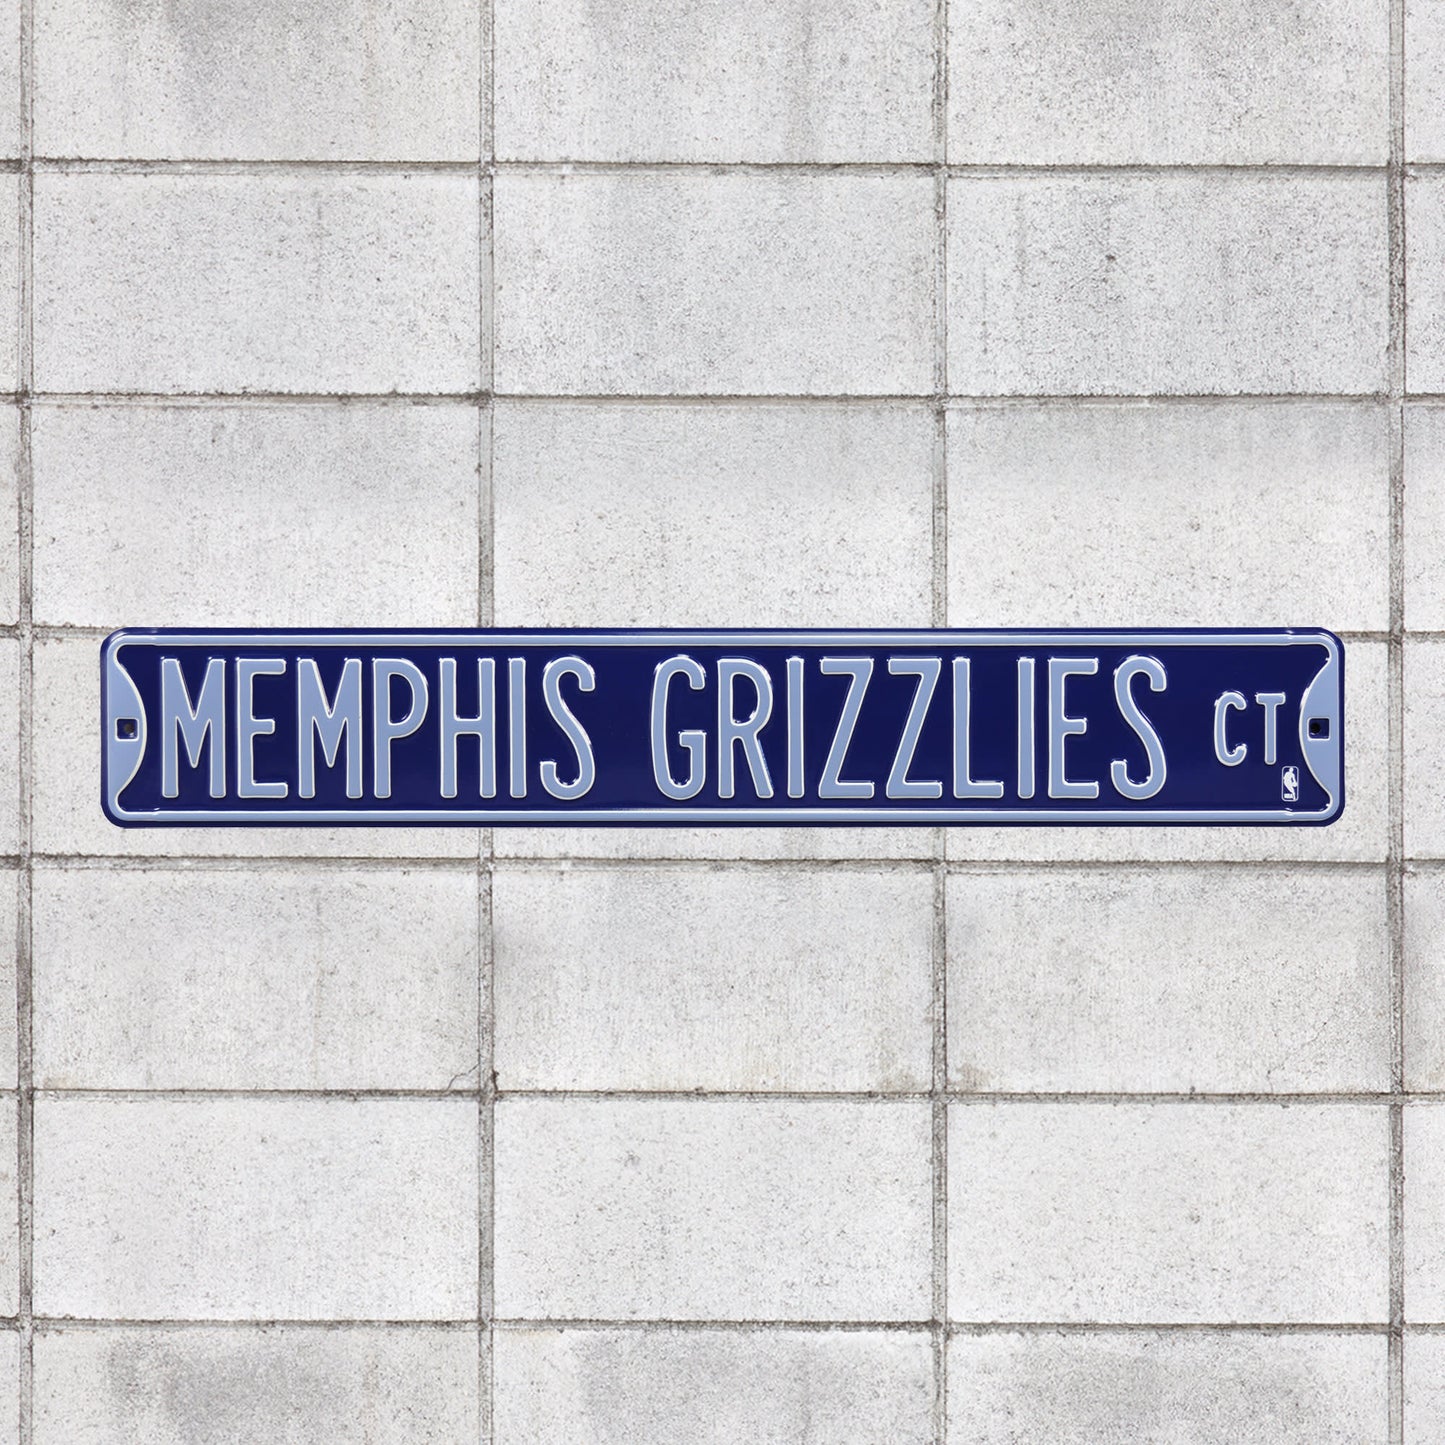 Memphis Grizzlies: Court - Officially Licensed NBA Metal Street Sign